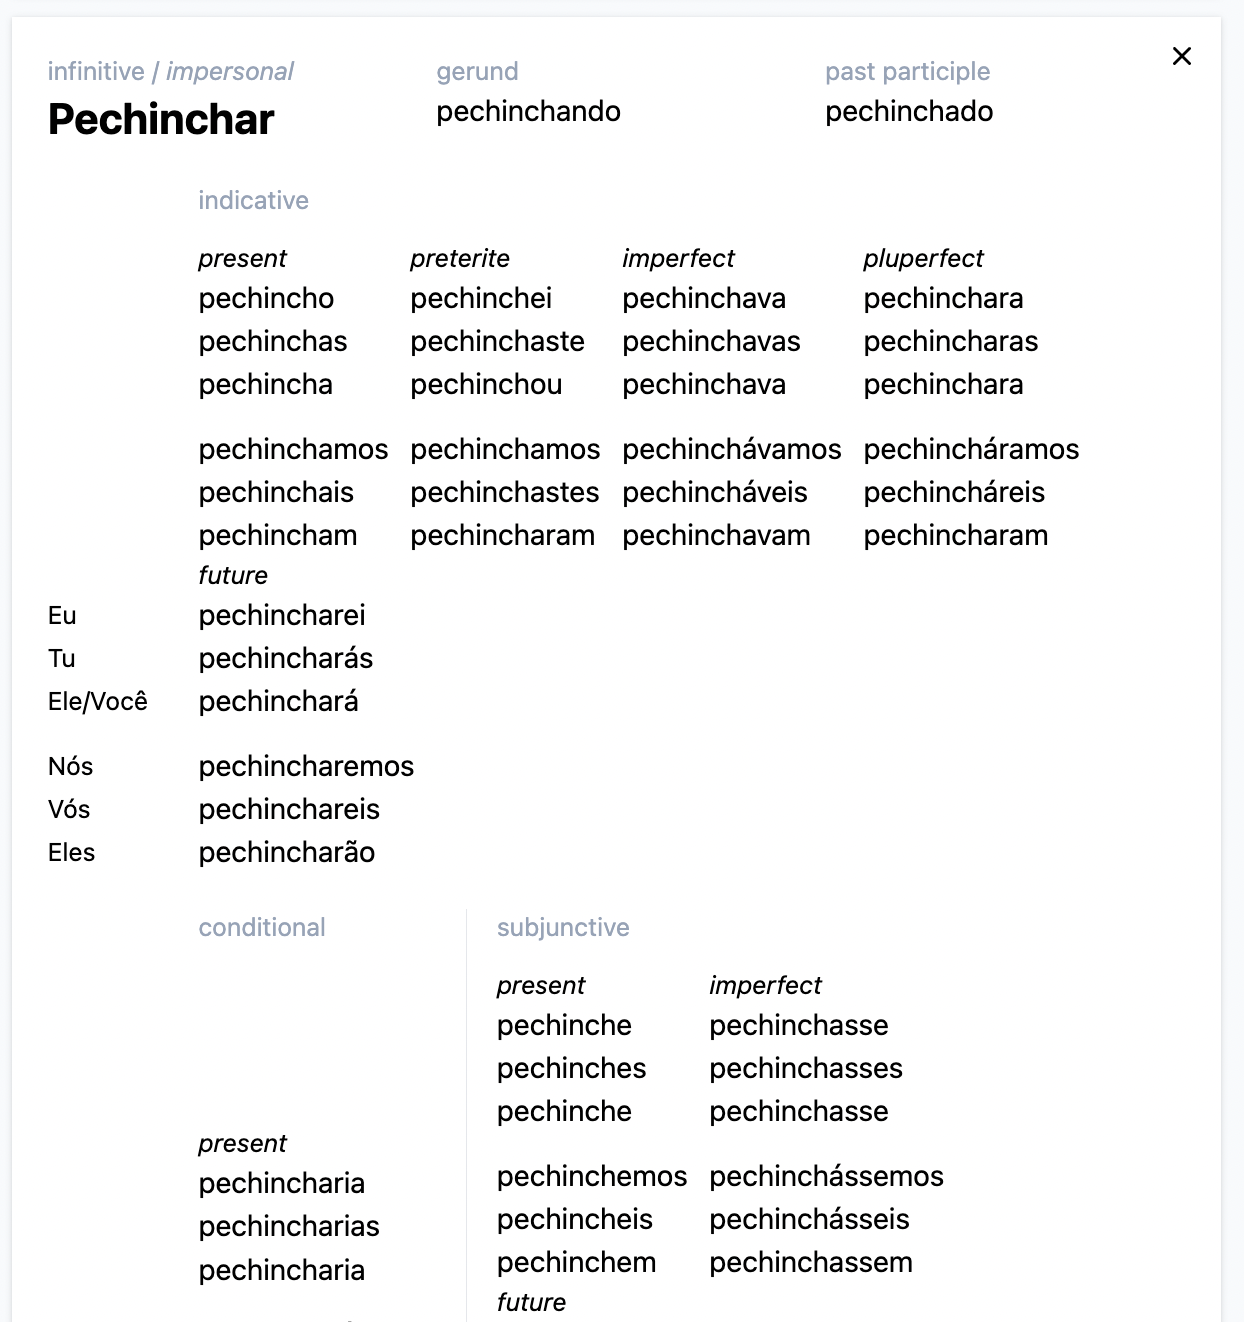 verb conjugation table for "pechinchar", the word is too long and the layout is broken